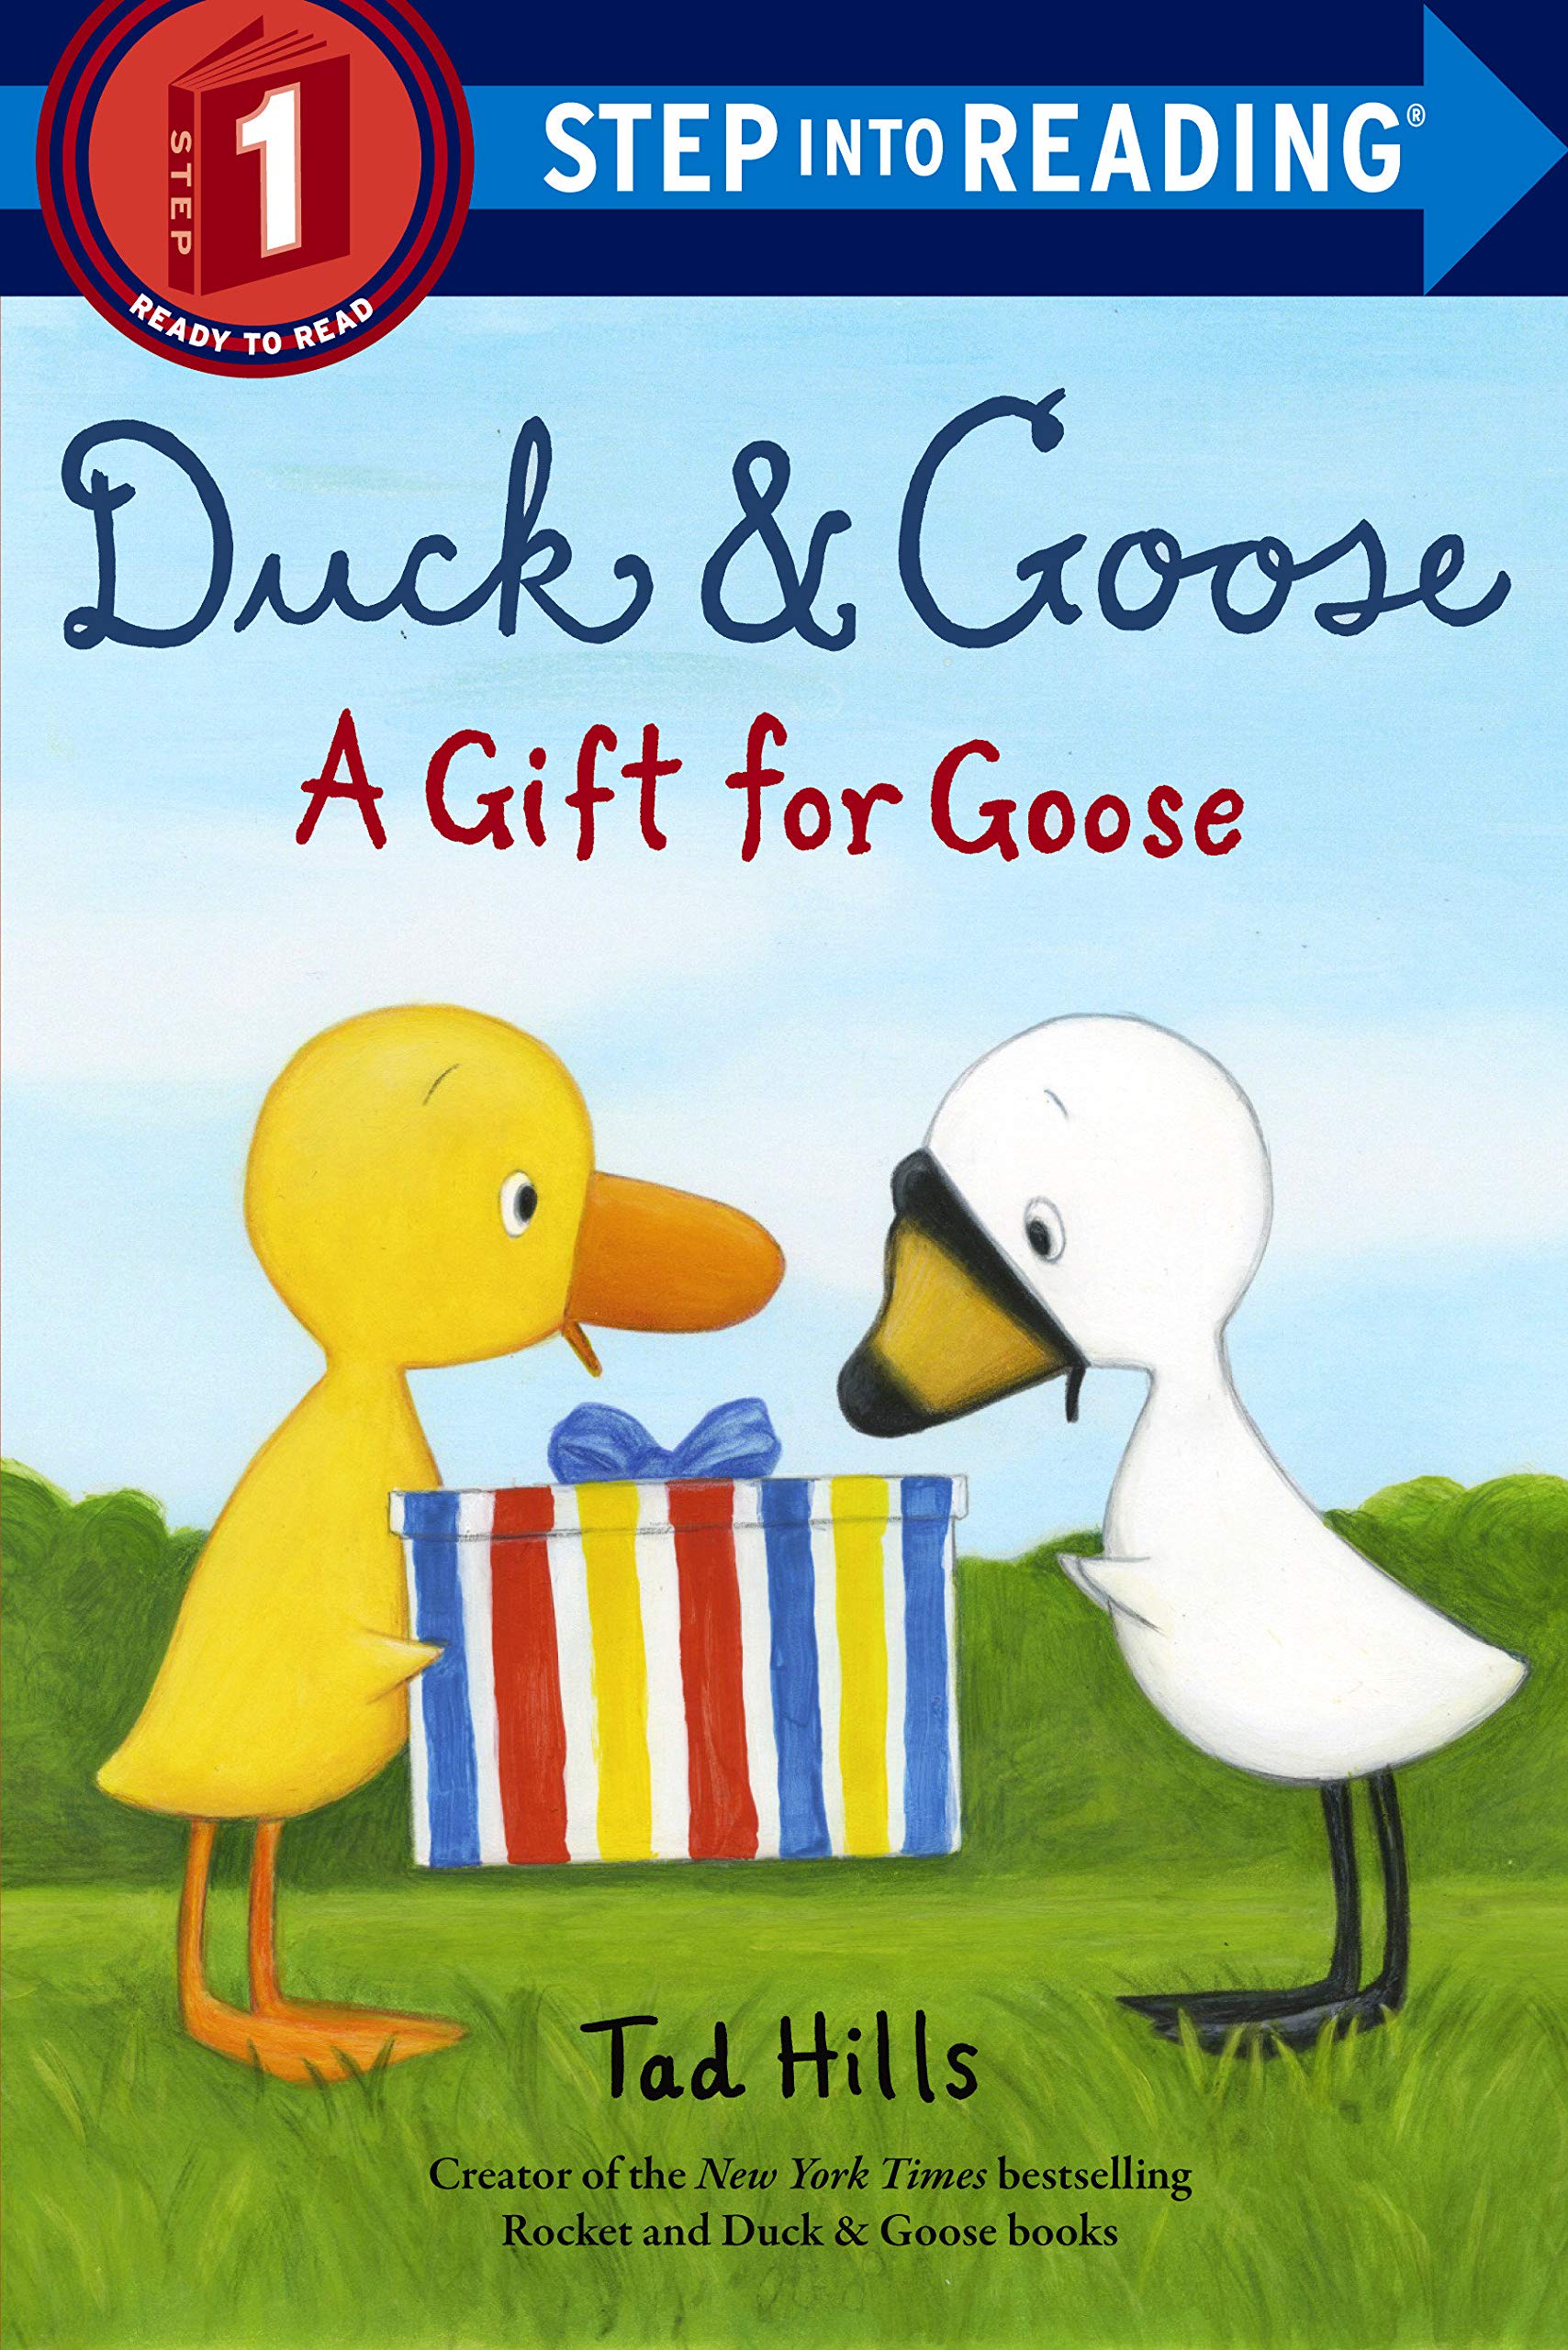 Duck and Goose, a Gift for Goose